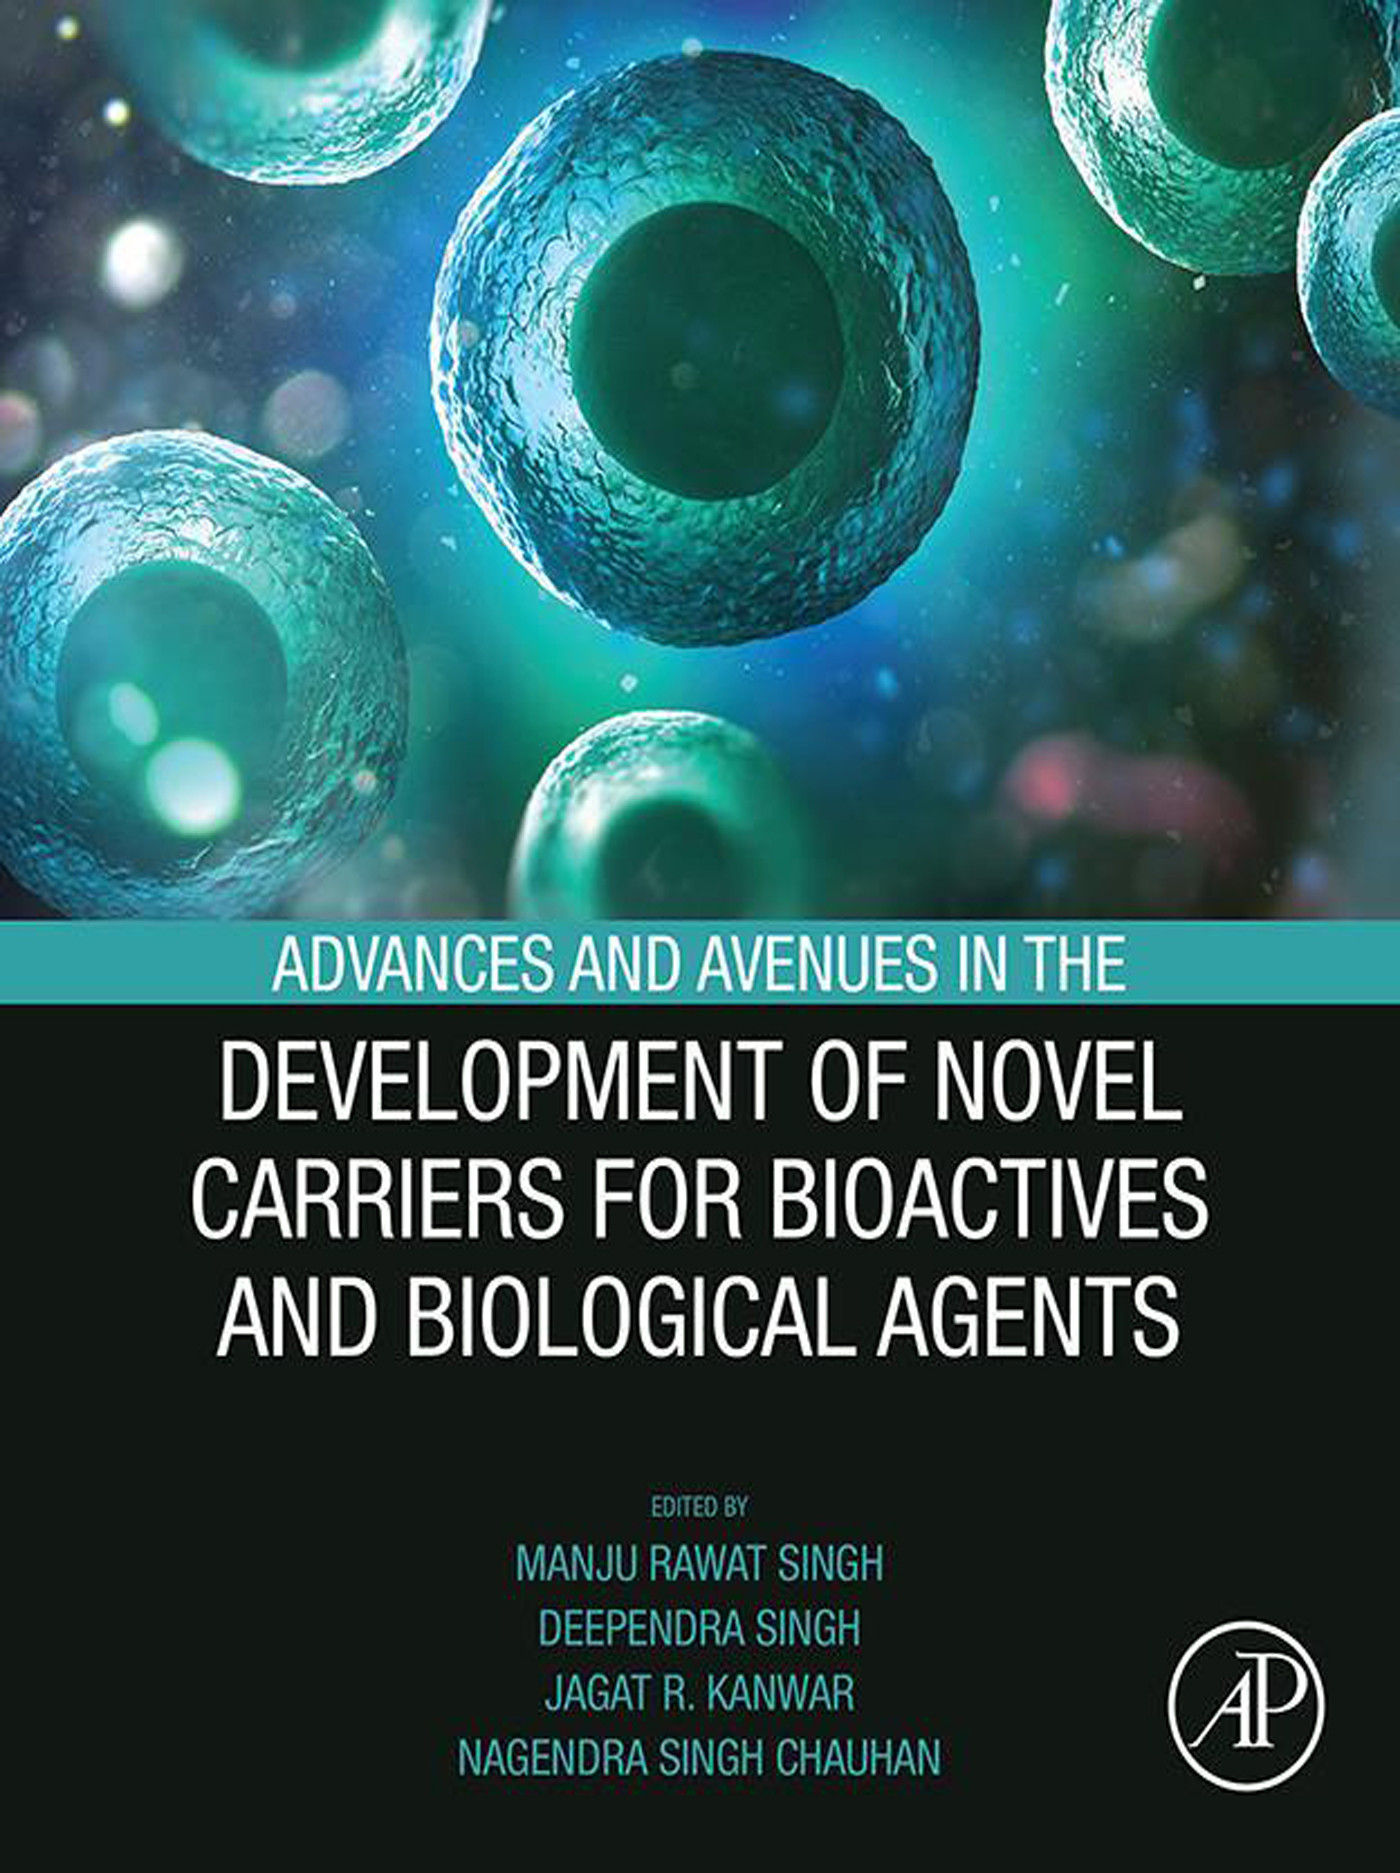 Advances and Avenues in the Development of Novel Carriers for Bioactives and Biological Agents